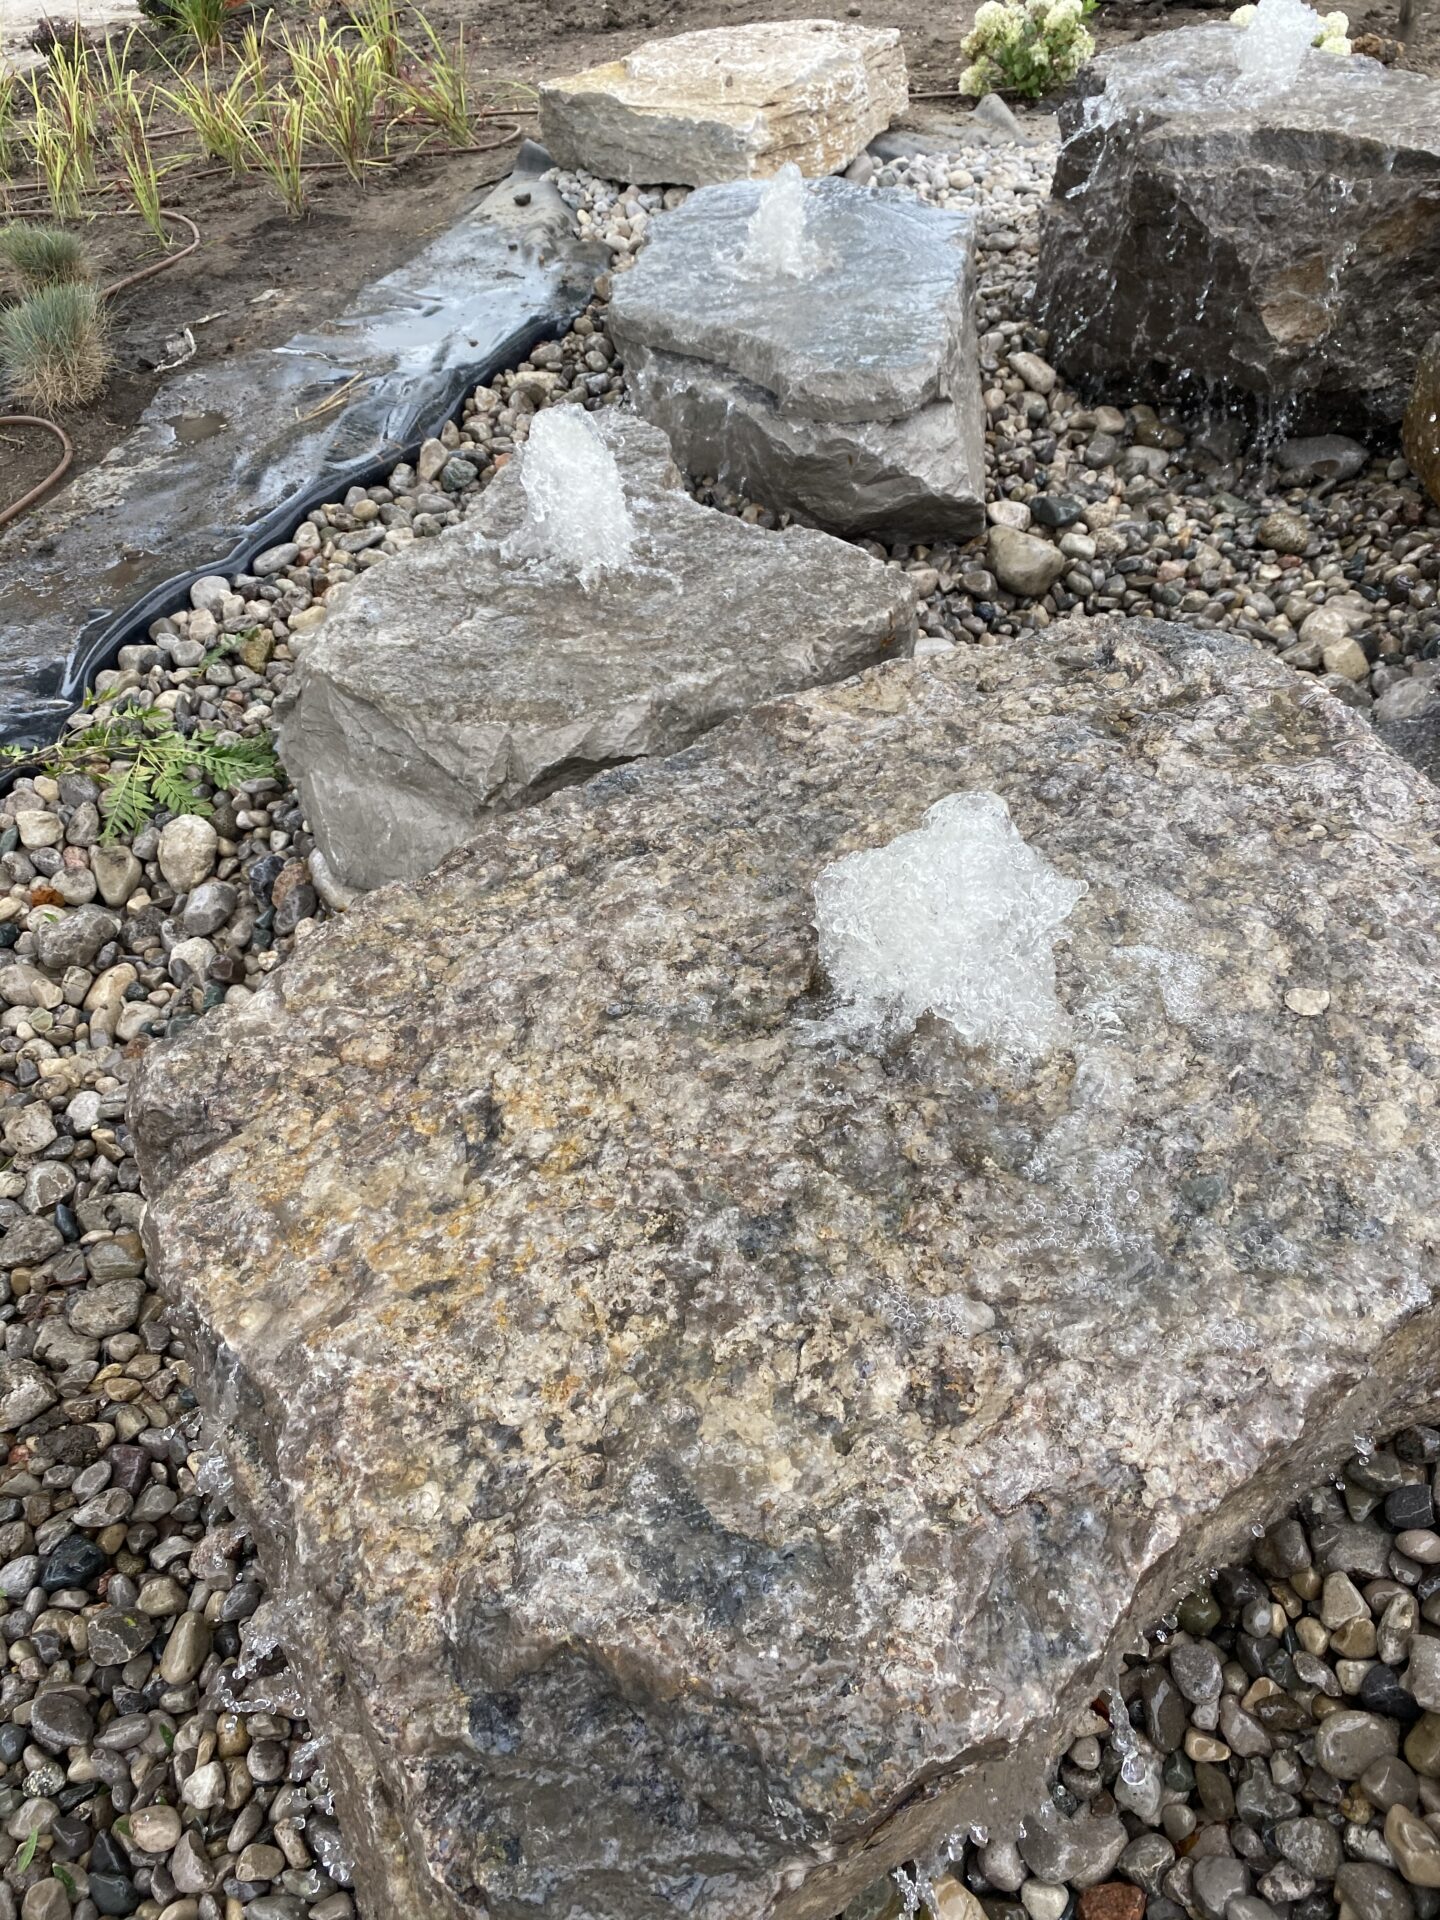 This image features a rocky landscape with water splashing on large stones, surrounded by smaller pebbles and vegetation, possibly part of a garden feature.